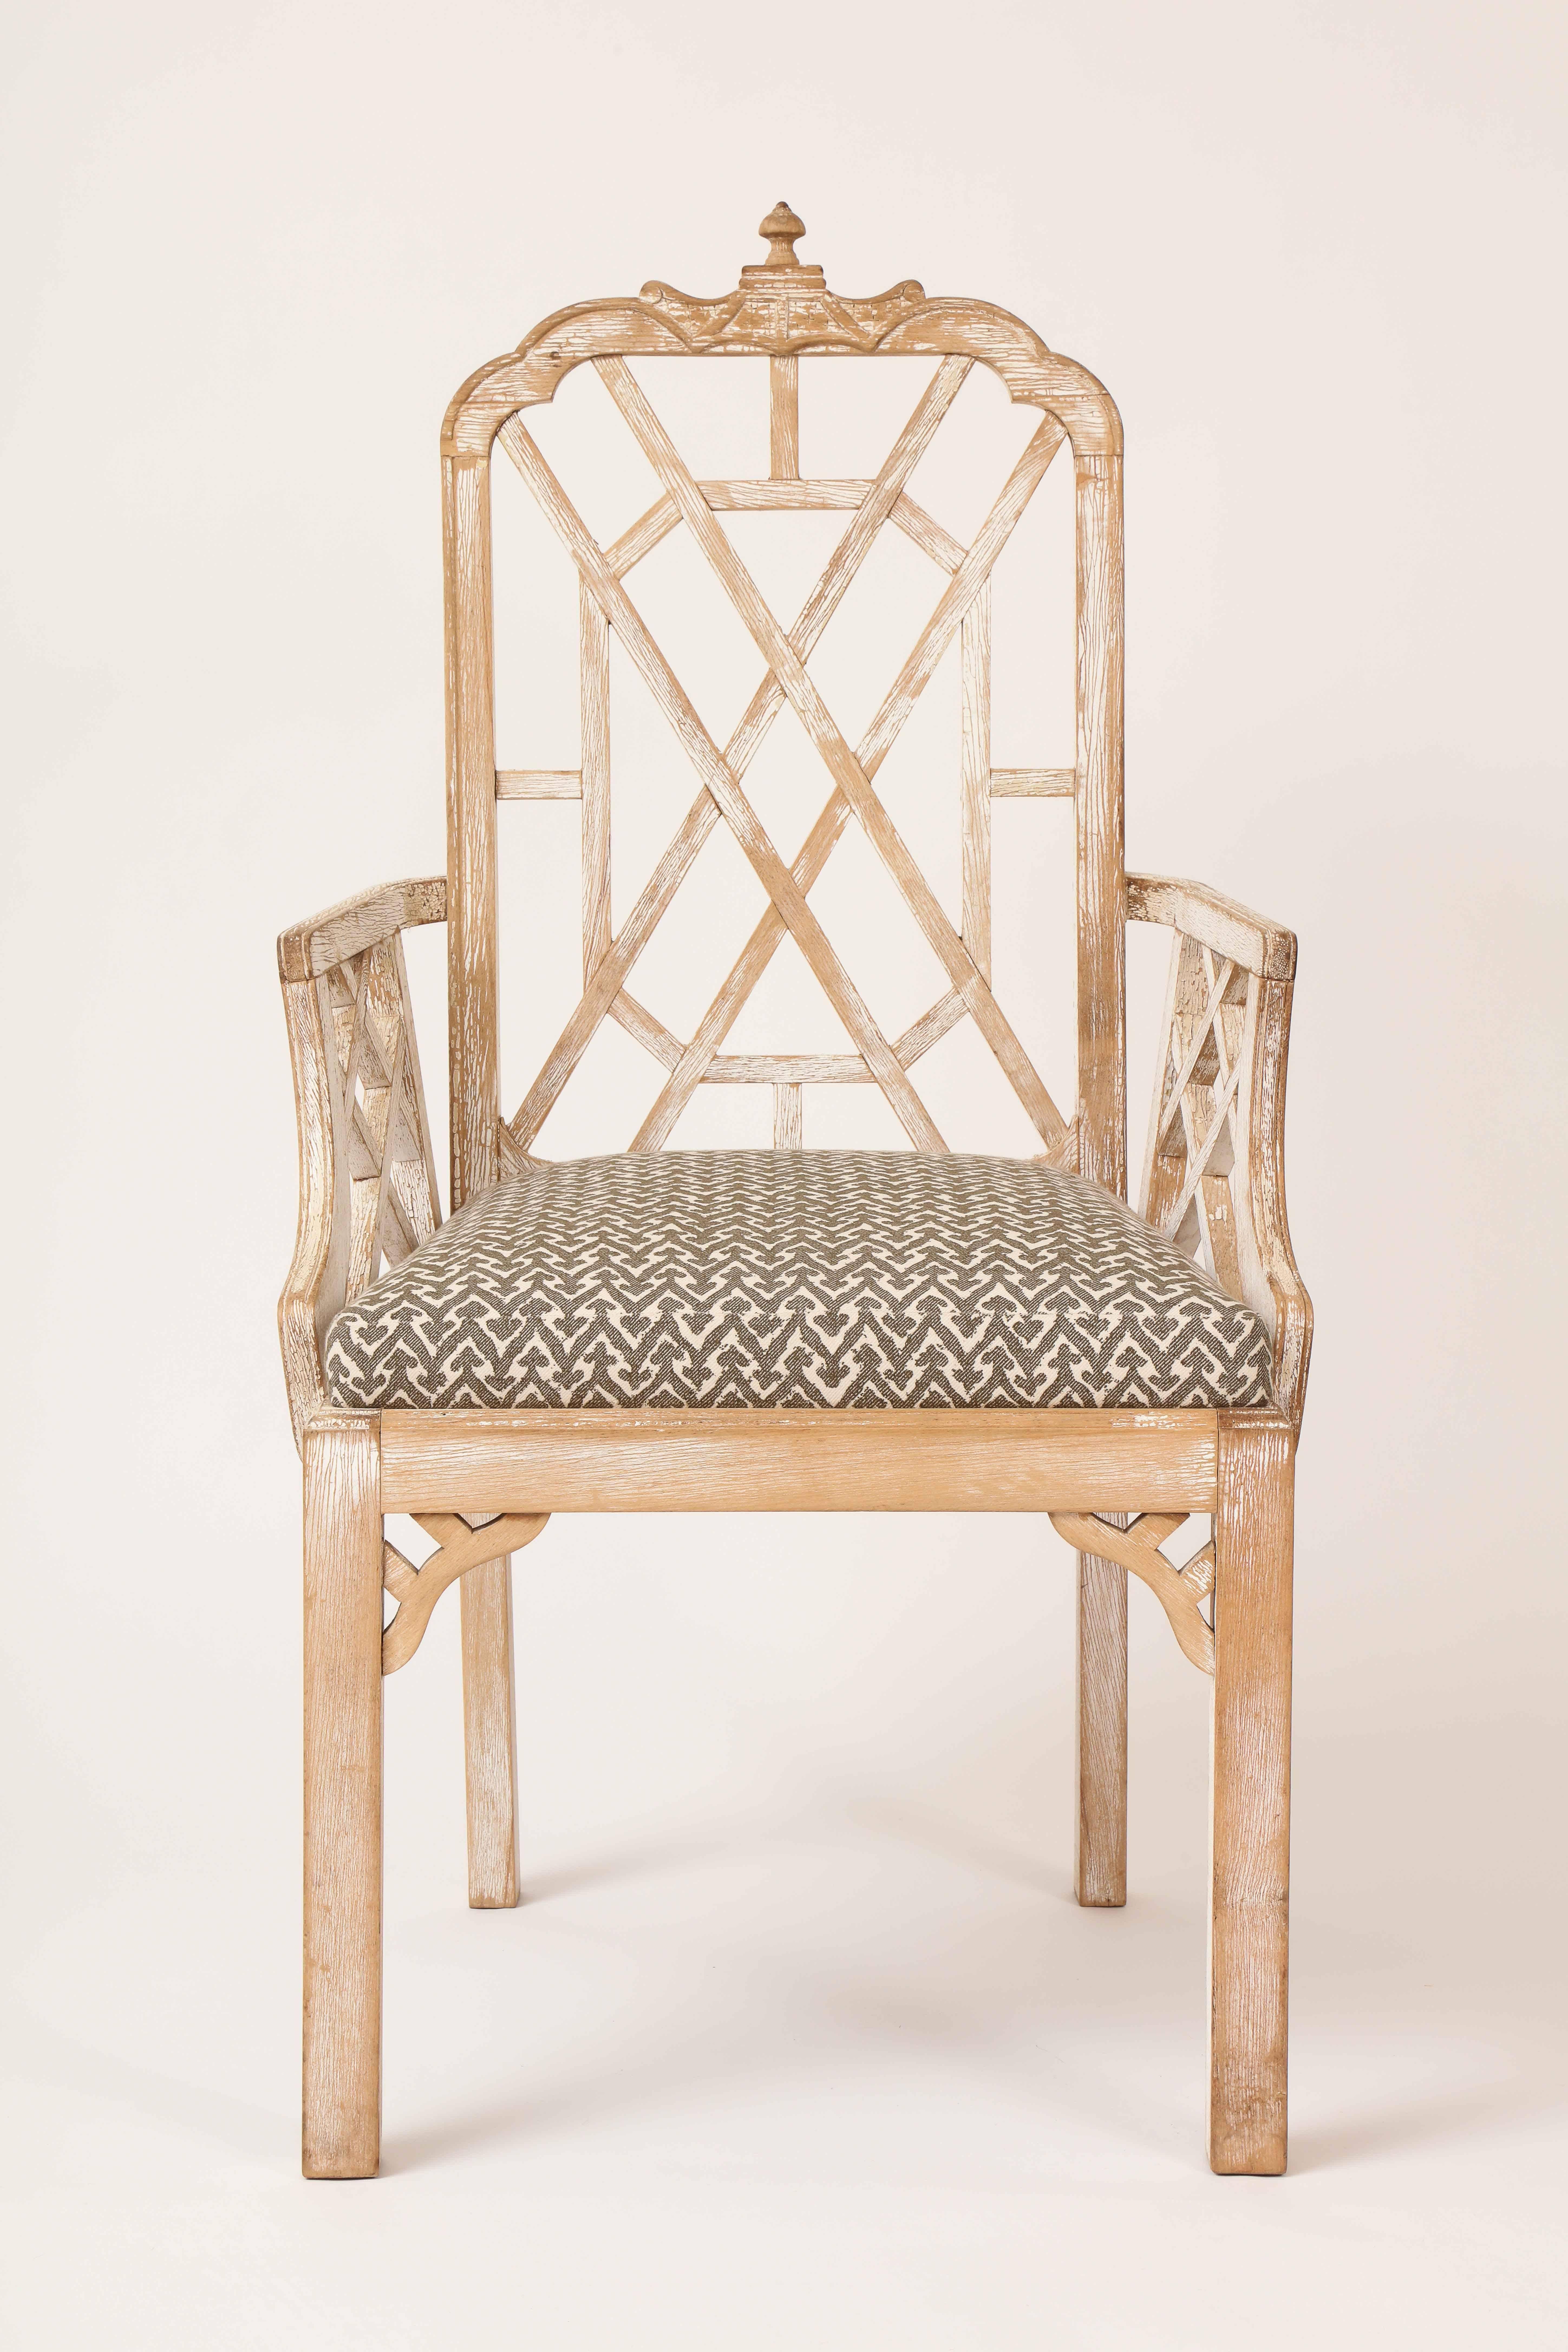 This English Georgian style armchair in the Chinese Chippendale taste, made of wood with original distressed paint, has a lattice form back, with armrests raised on matching lattice, raised on block form legs.